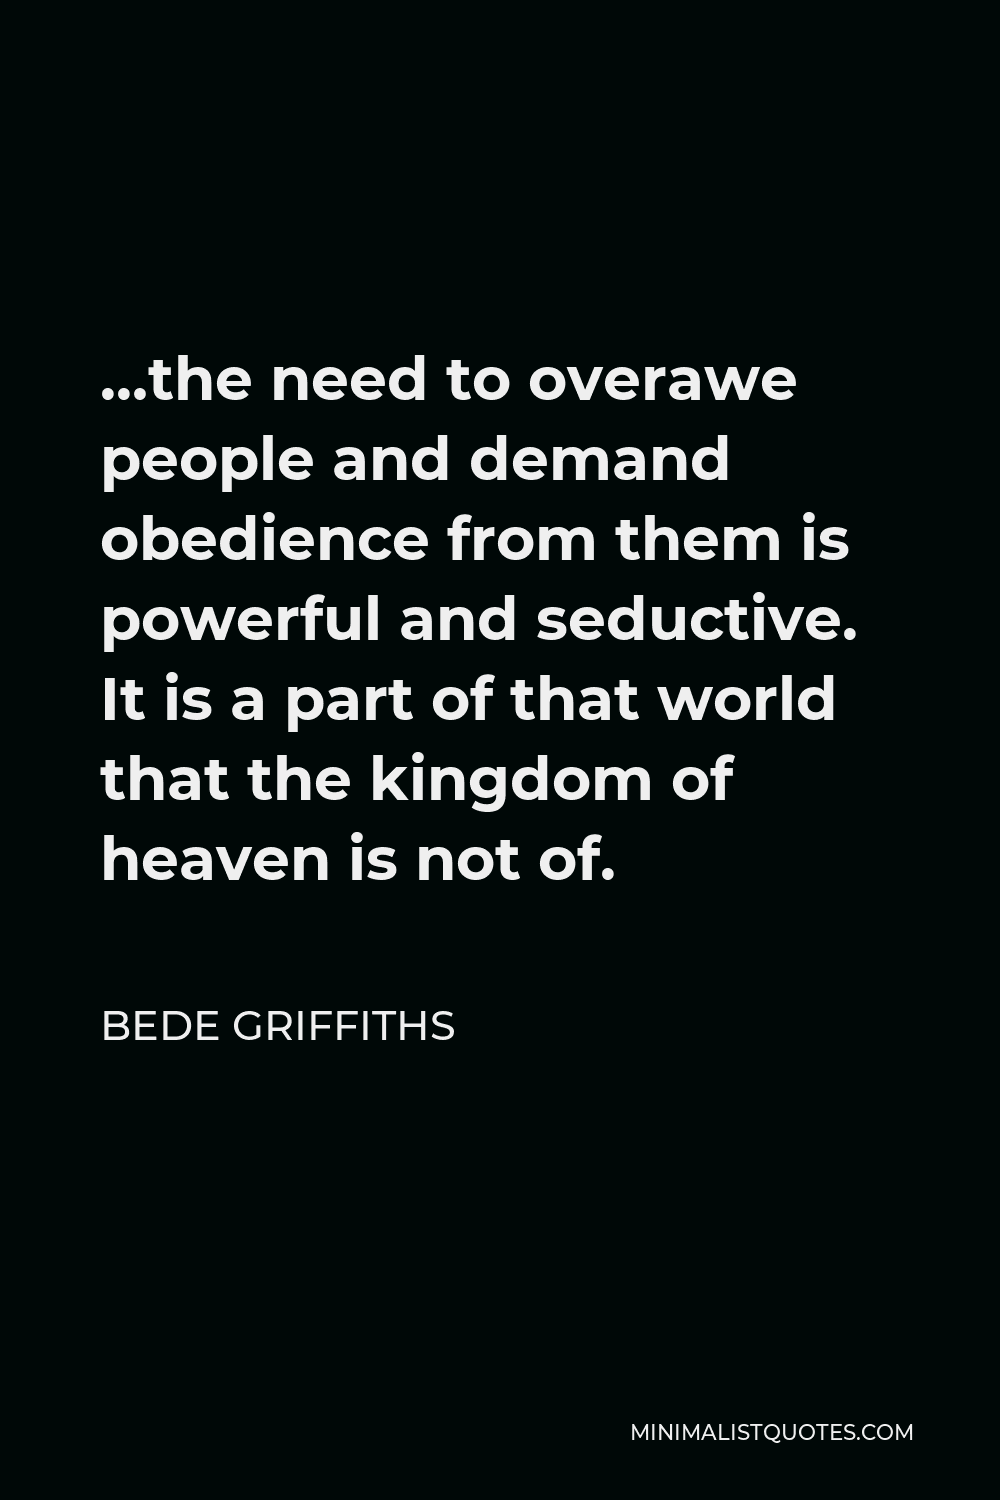 Bede Griffiths Quote - …the need to overawe people and demand obedience from them is powerful and seductive. It is a part of that world that the kingdom of heaven is not of.